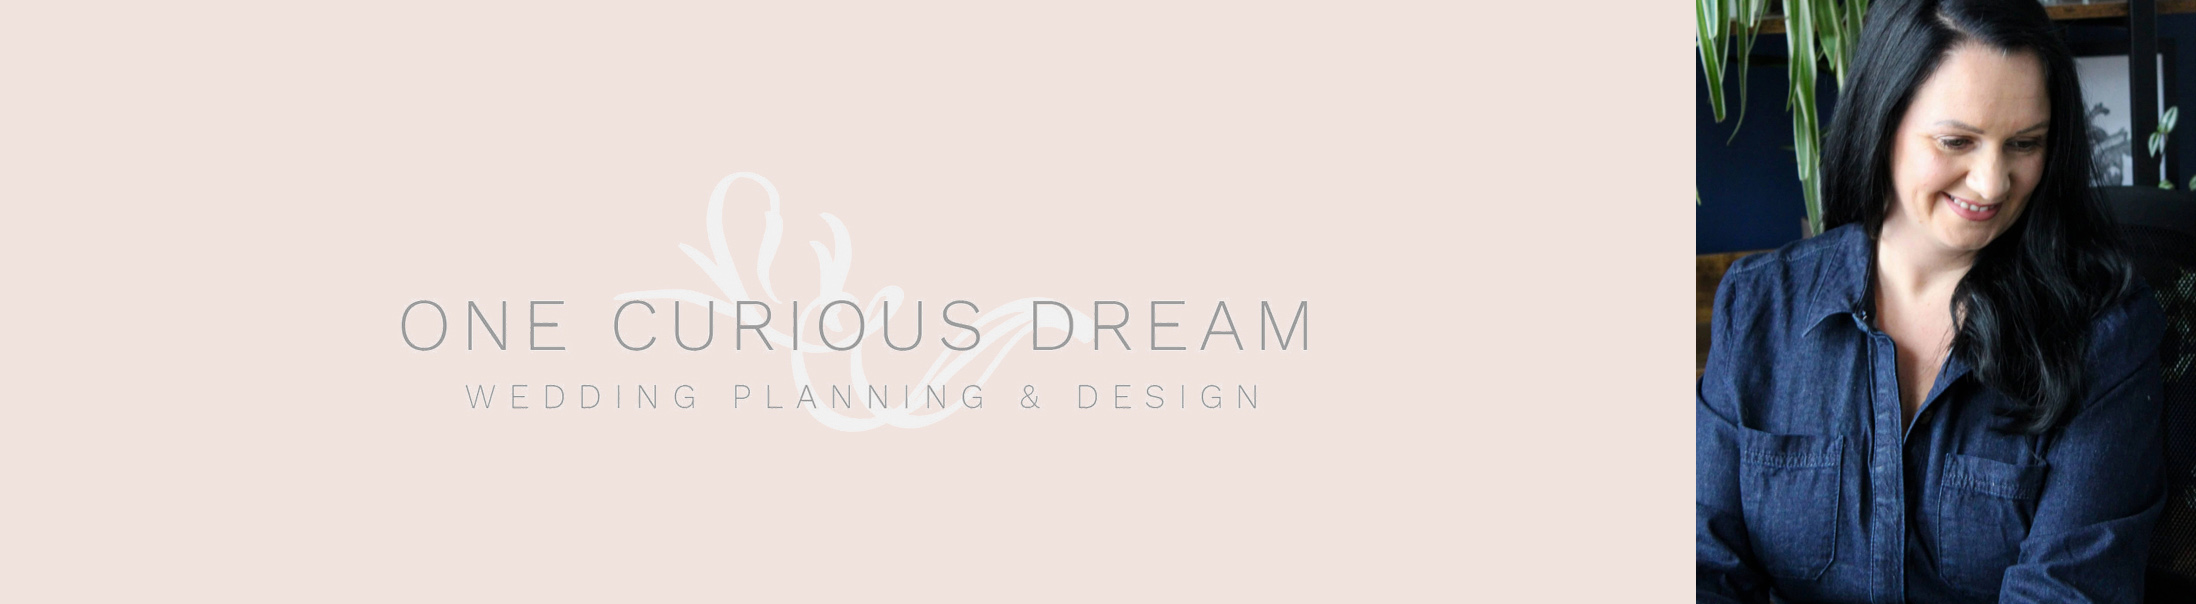 Top UK Wedding Planners - One Curious Dream